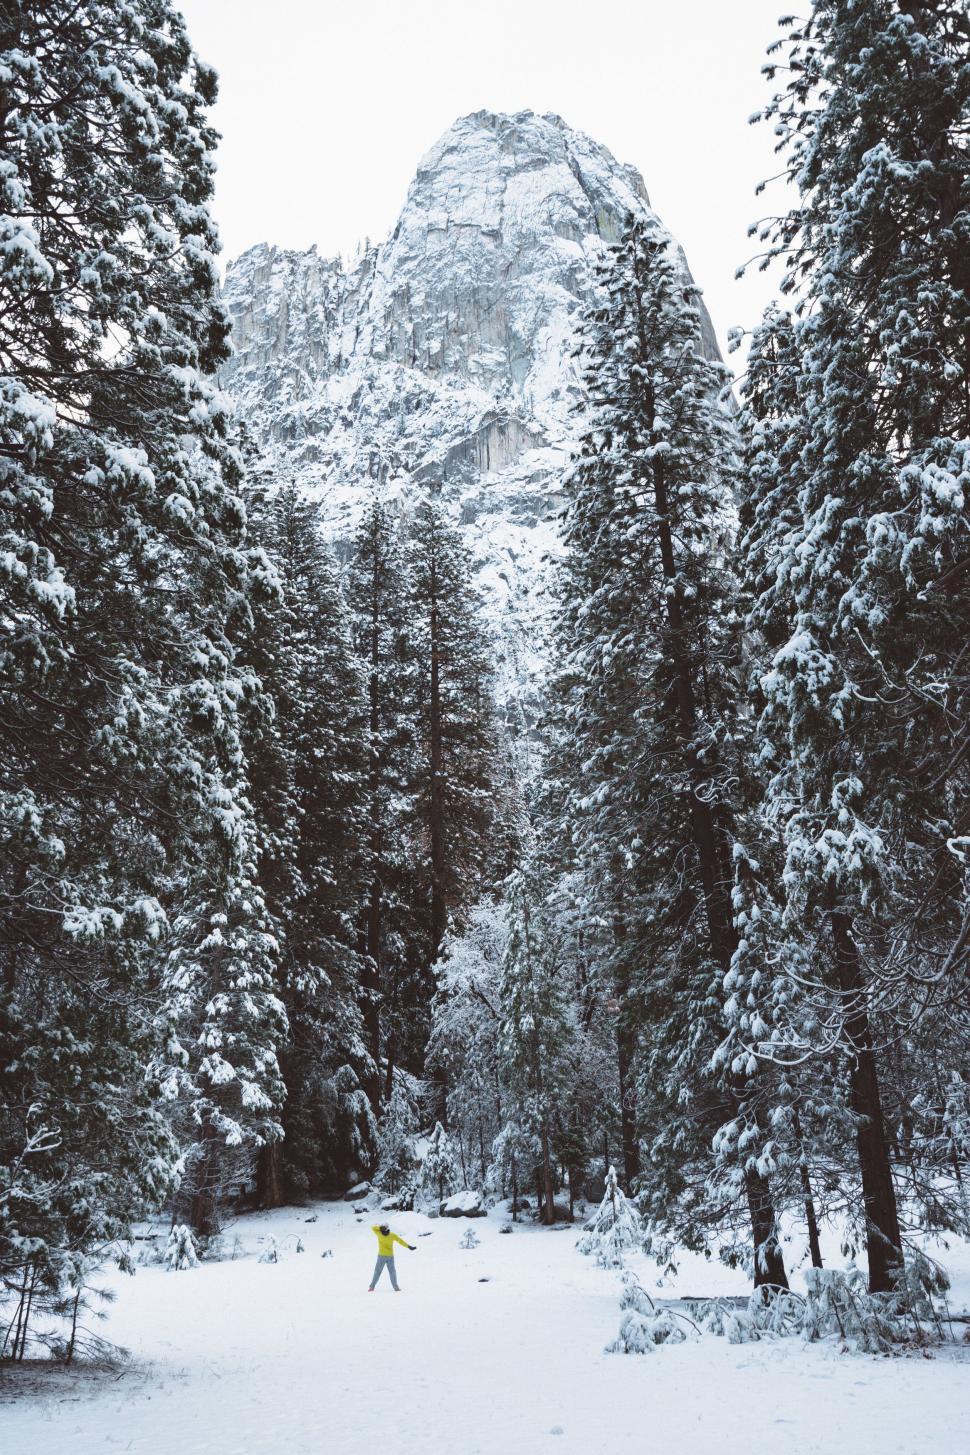 Free Image of Person Walking Through a Snow Covered Forest 